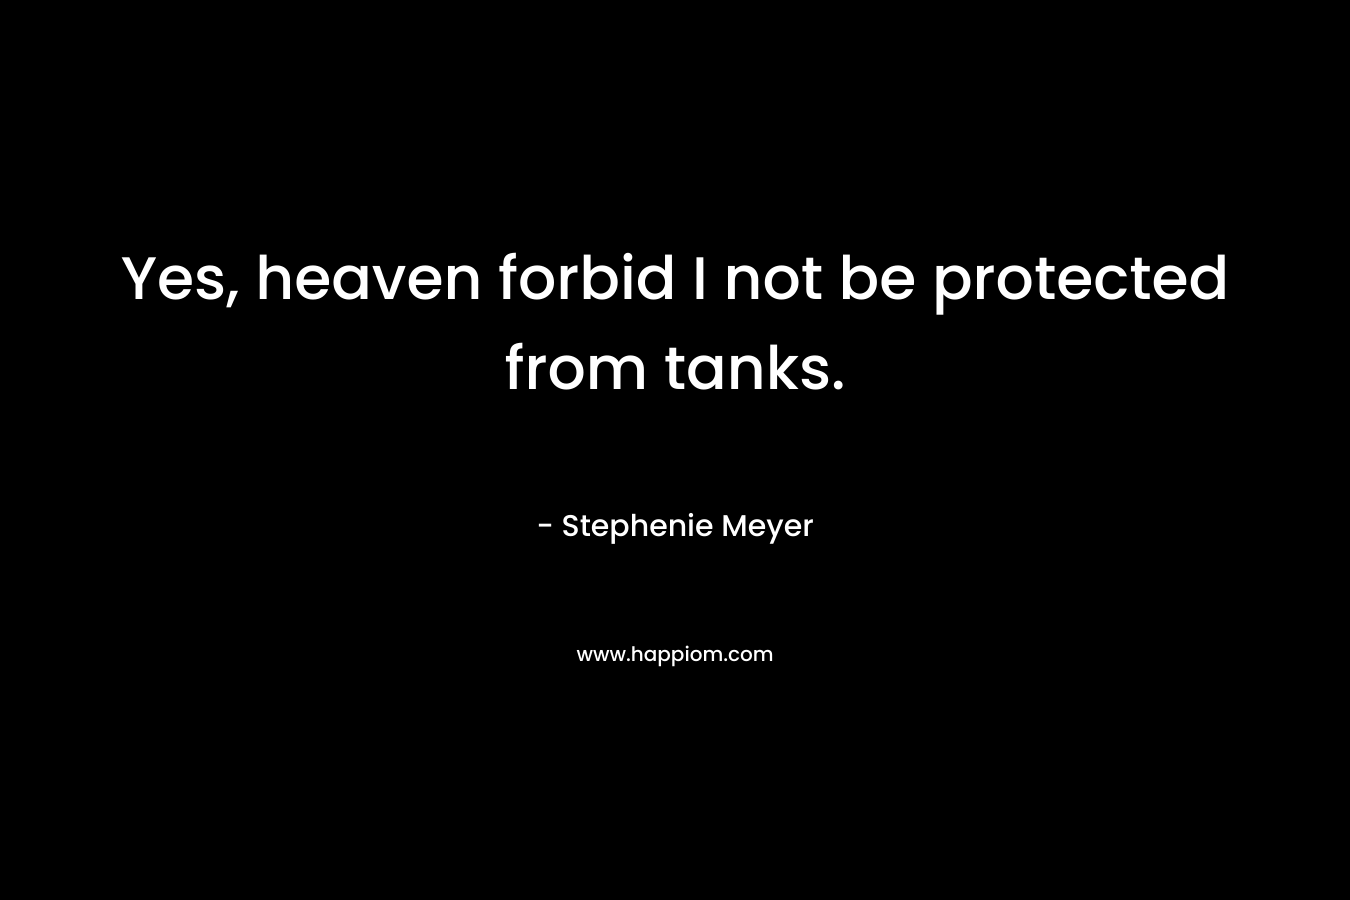 Yes, heaven forbid I not be protected from tanks.